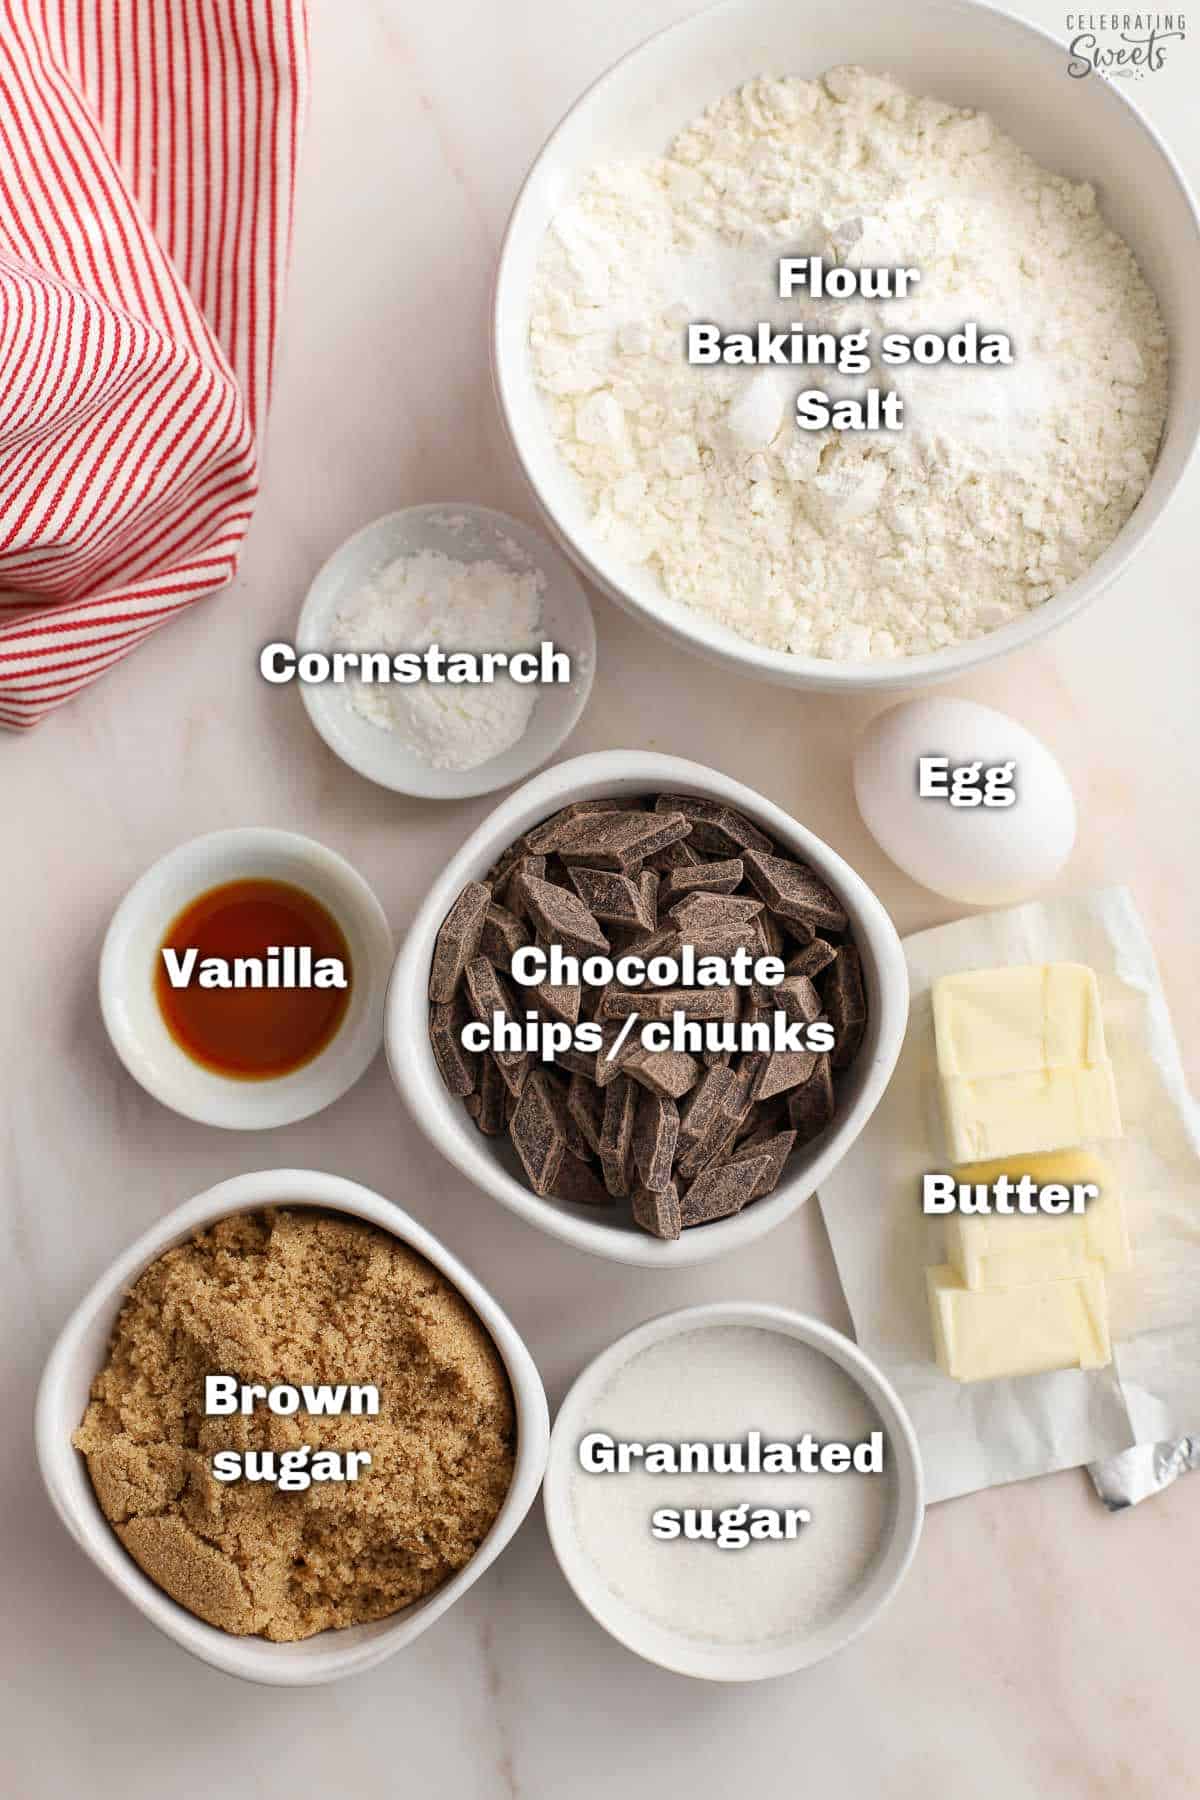 Ingredients for chocolate chip cookies: flour, baking soda, sugars, egg, butter, vanilla.